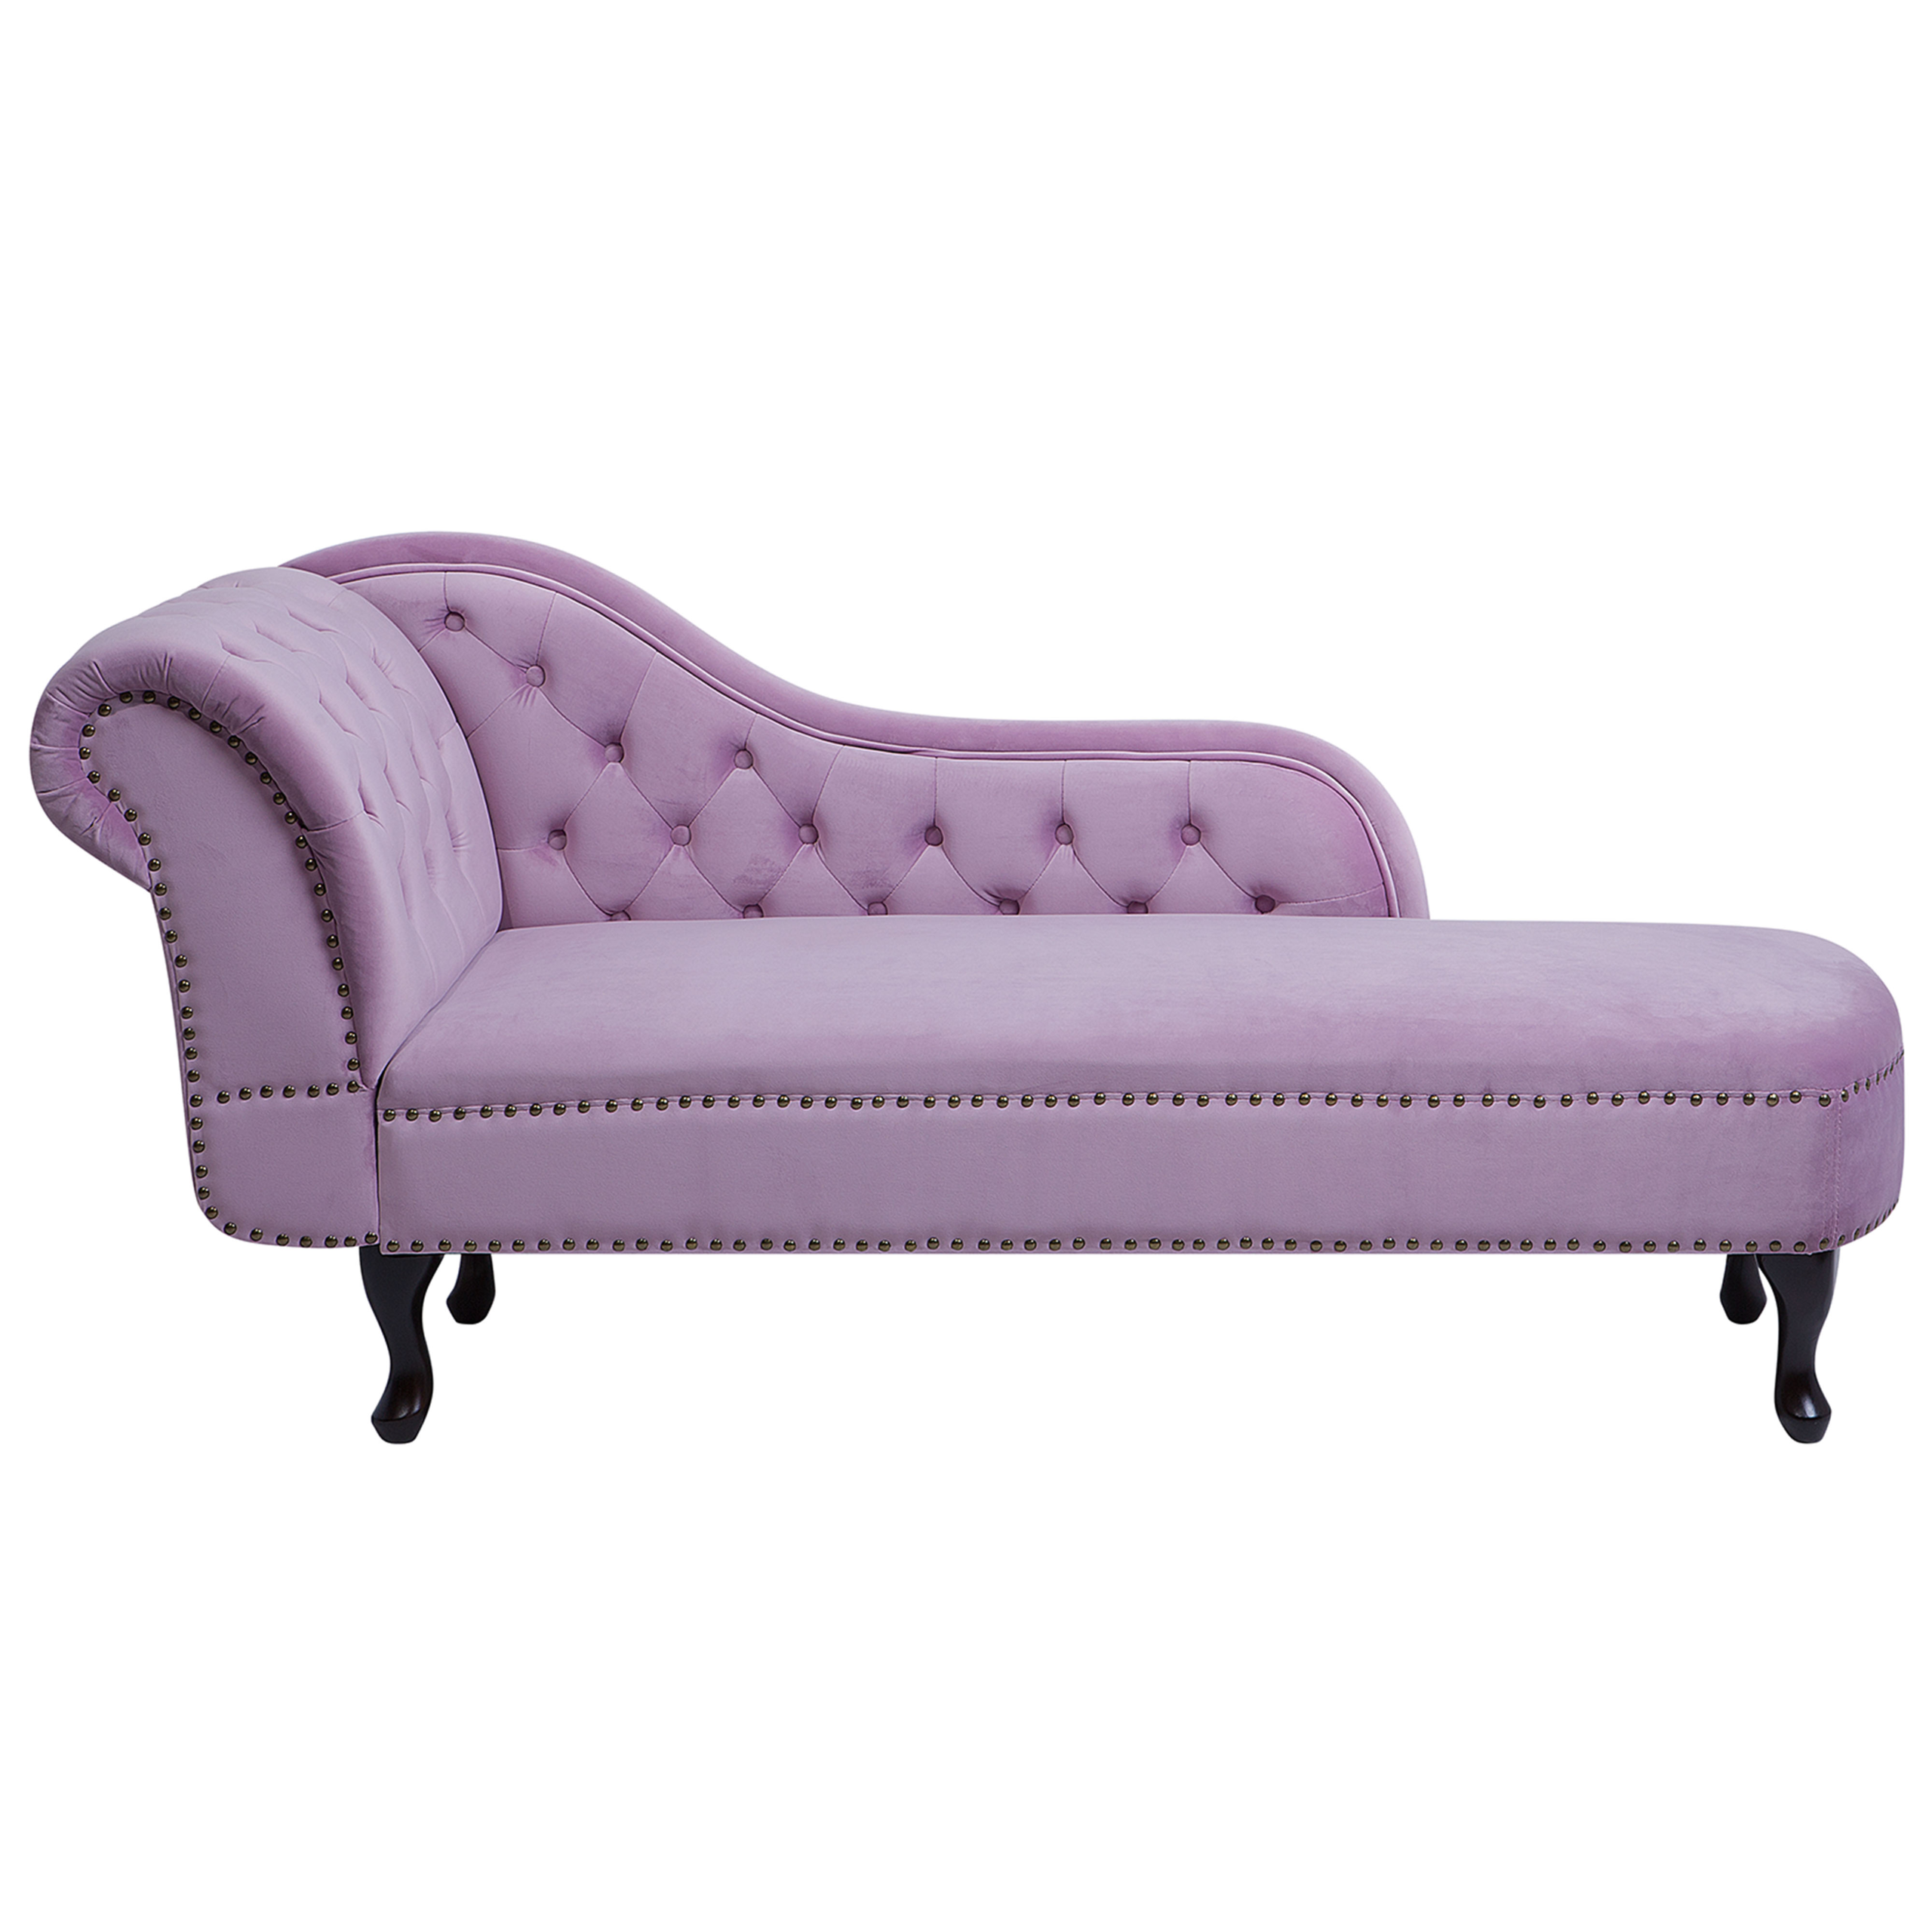 Beliani Chaise Lounge Pink Left Hand Velvet Buttoned Nailheads